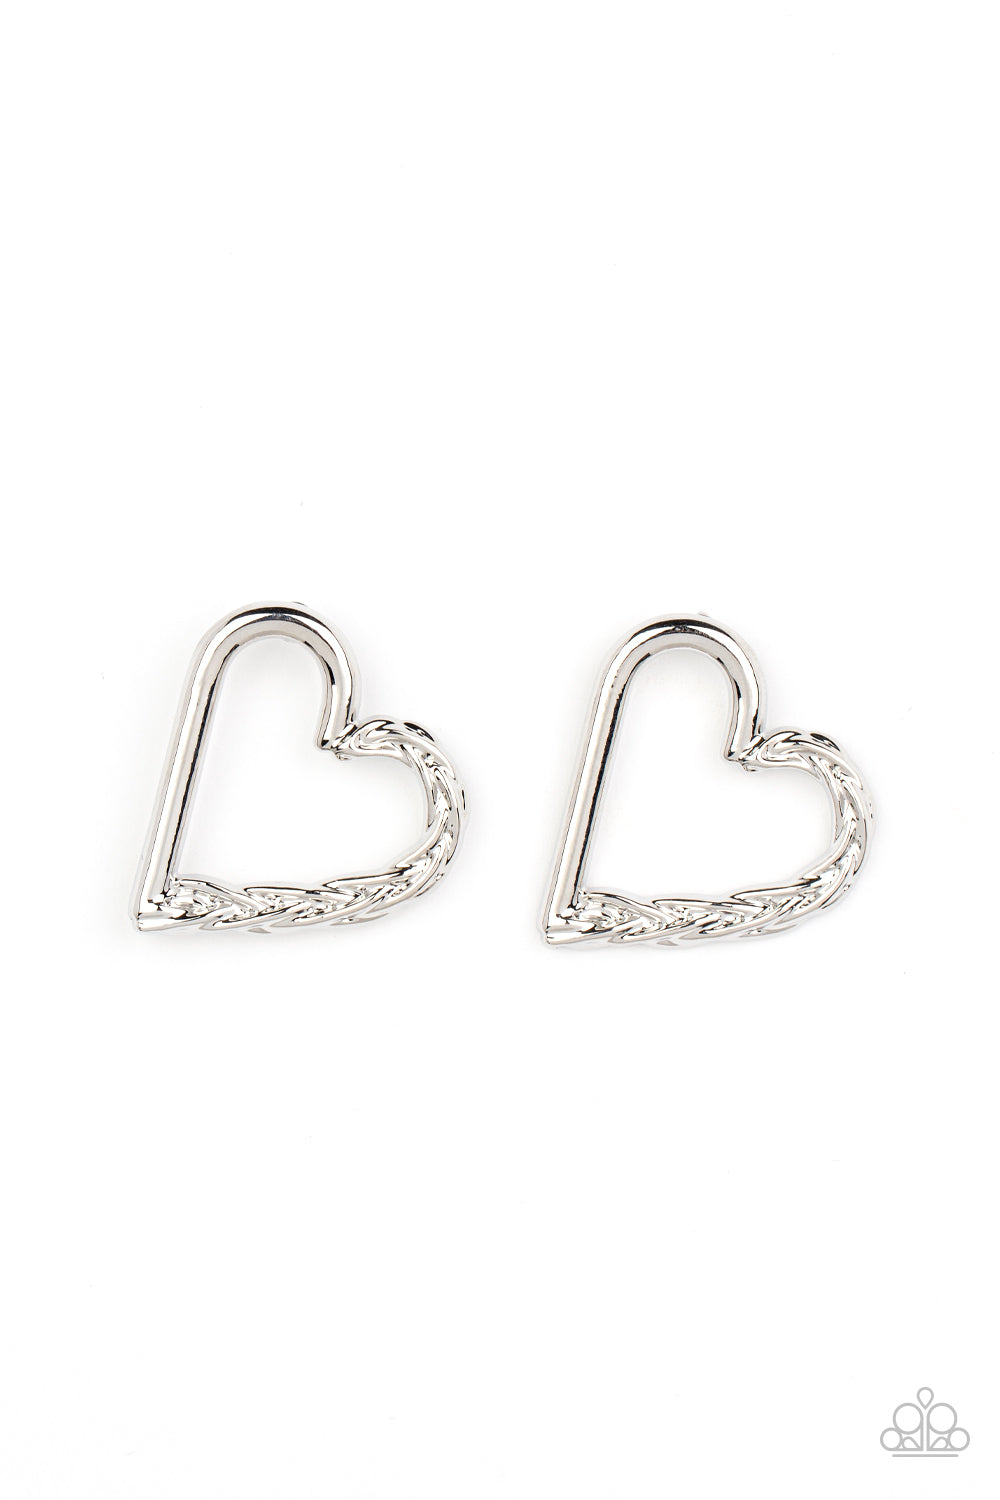 Cupid, Who? - Silver Earrings - Princess Glam Shop